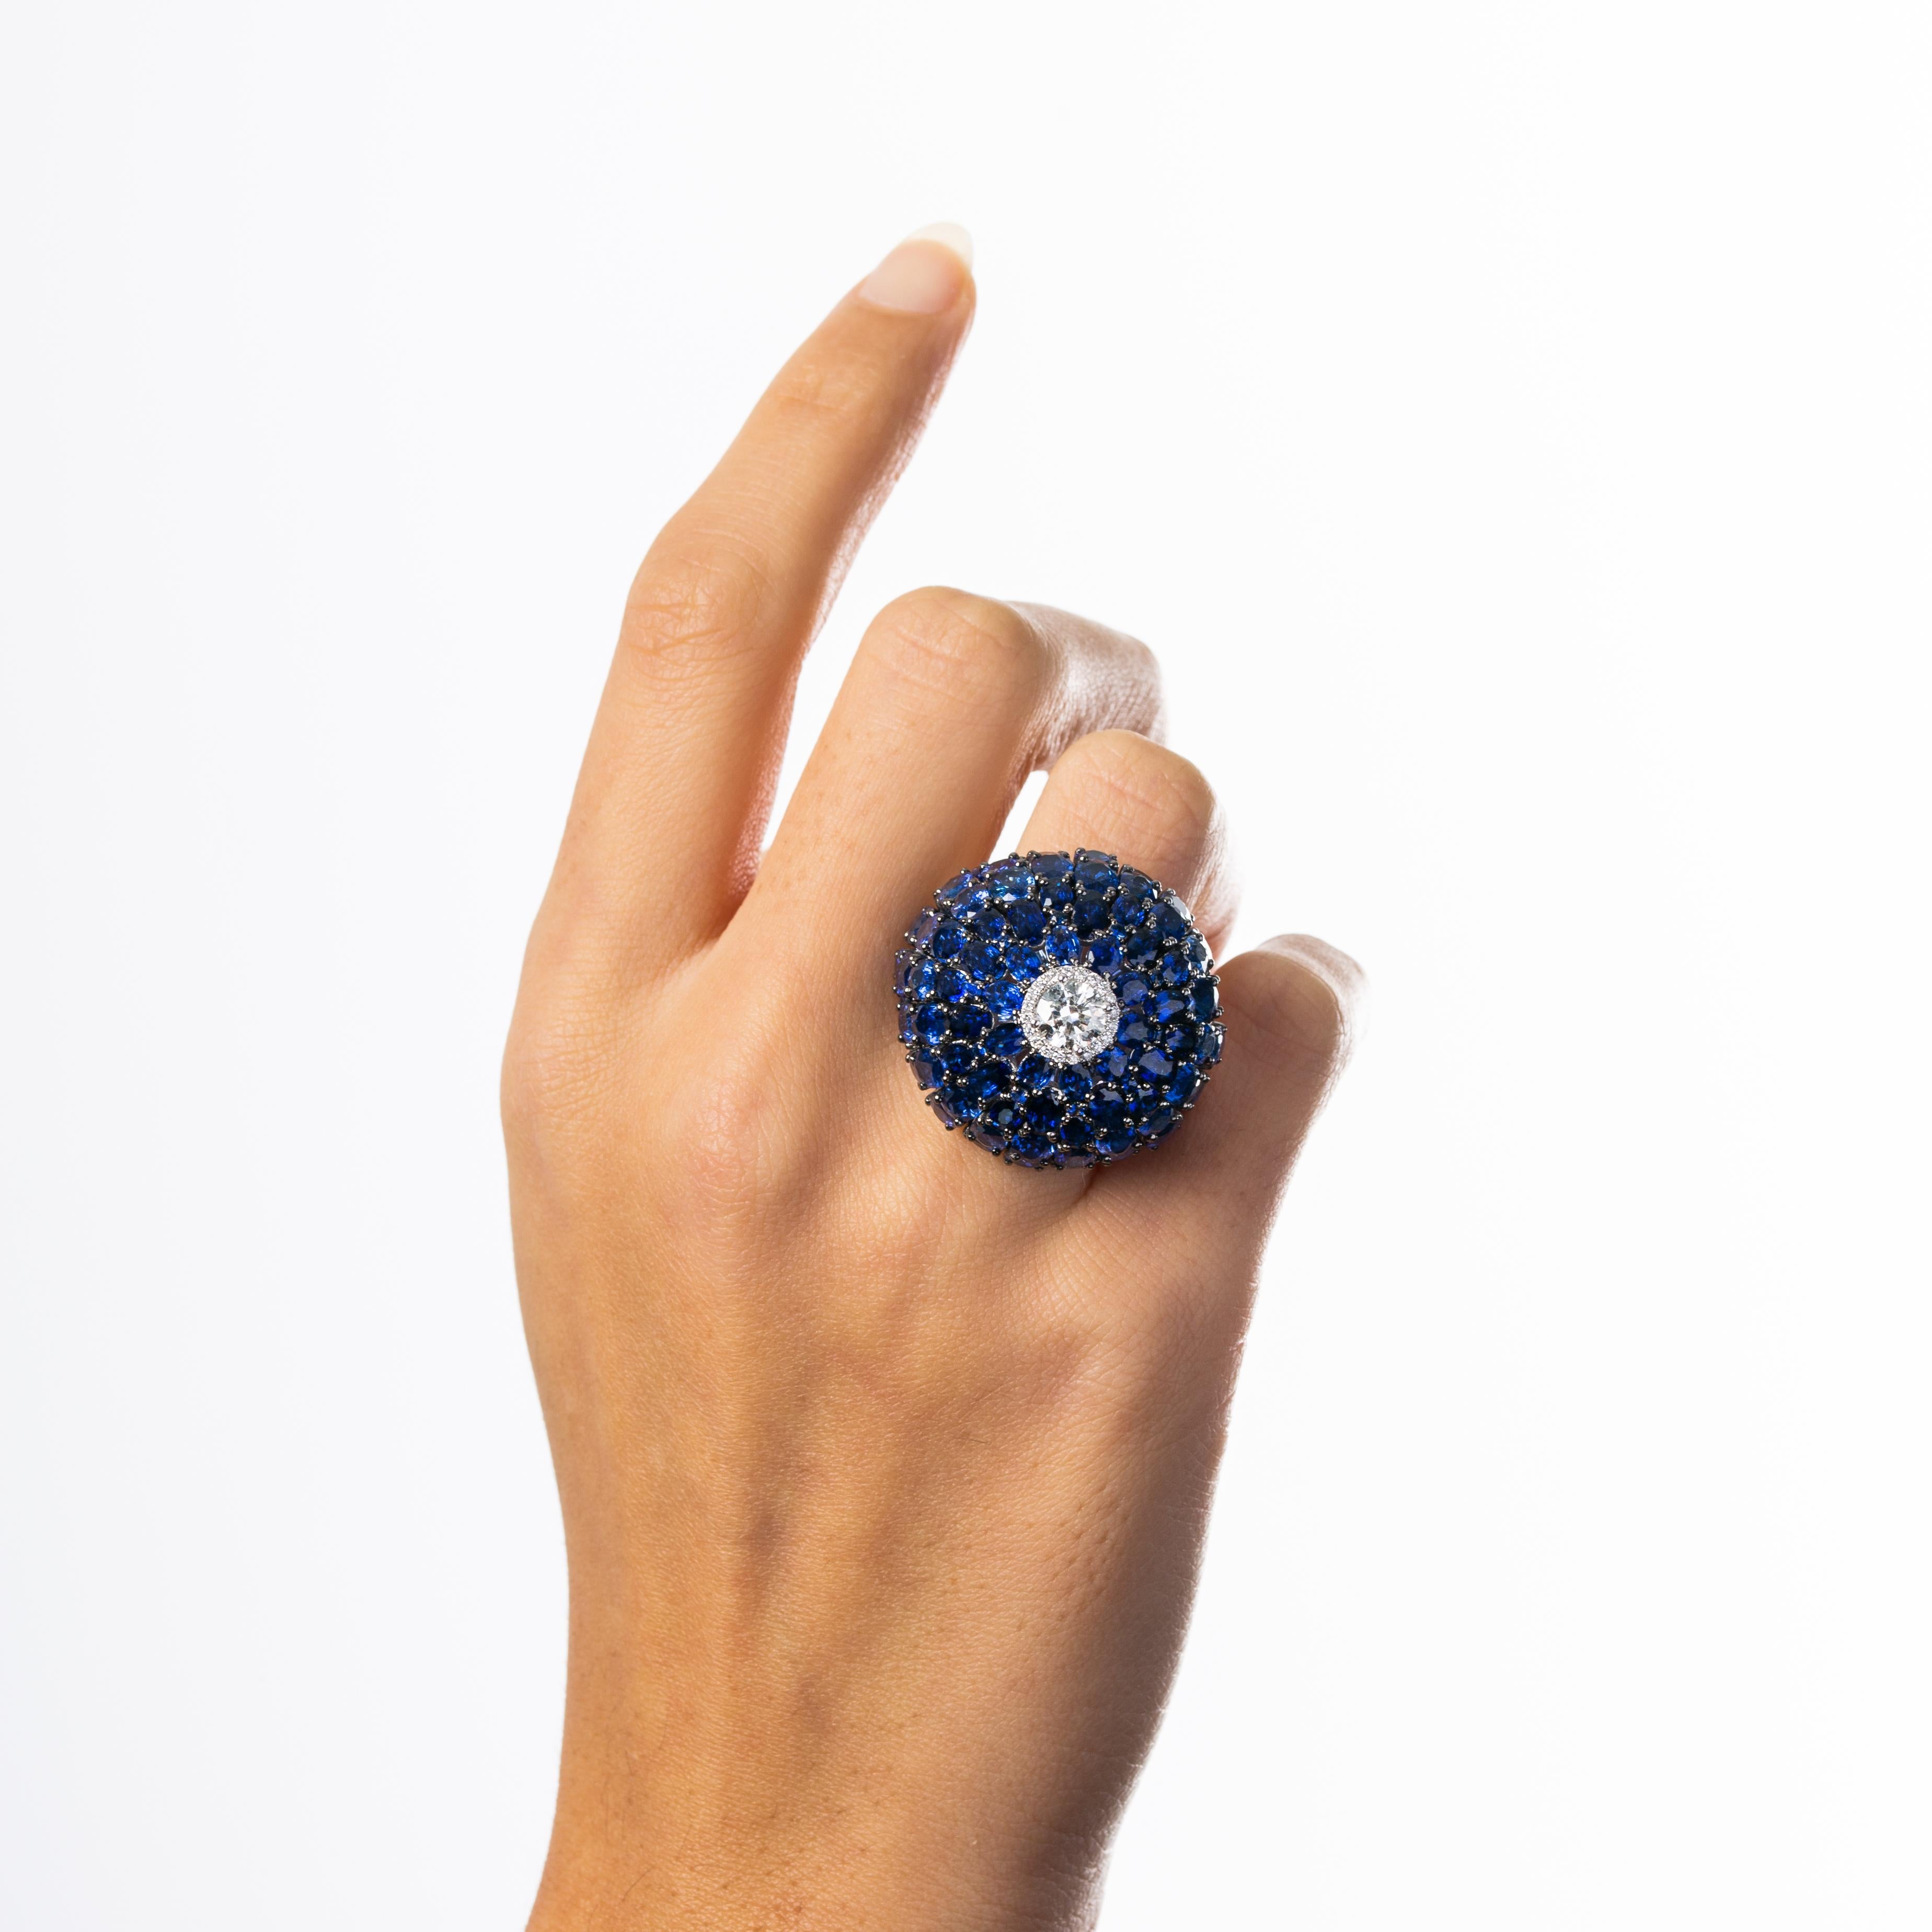 Round cut central Diamond 0.90 carat surrounded by diamonds 0.13 carat and blue Sapphire 29.42 carats on 18k white gold Ring.
Ring size: 7.5 US
Gross weight: 34.23 grams.